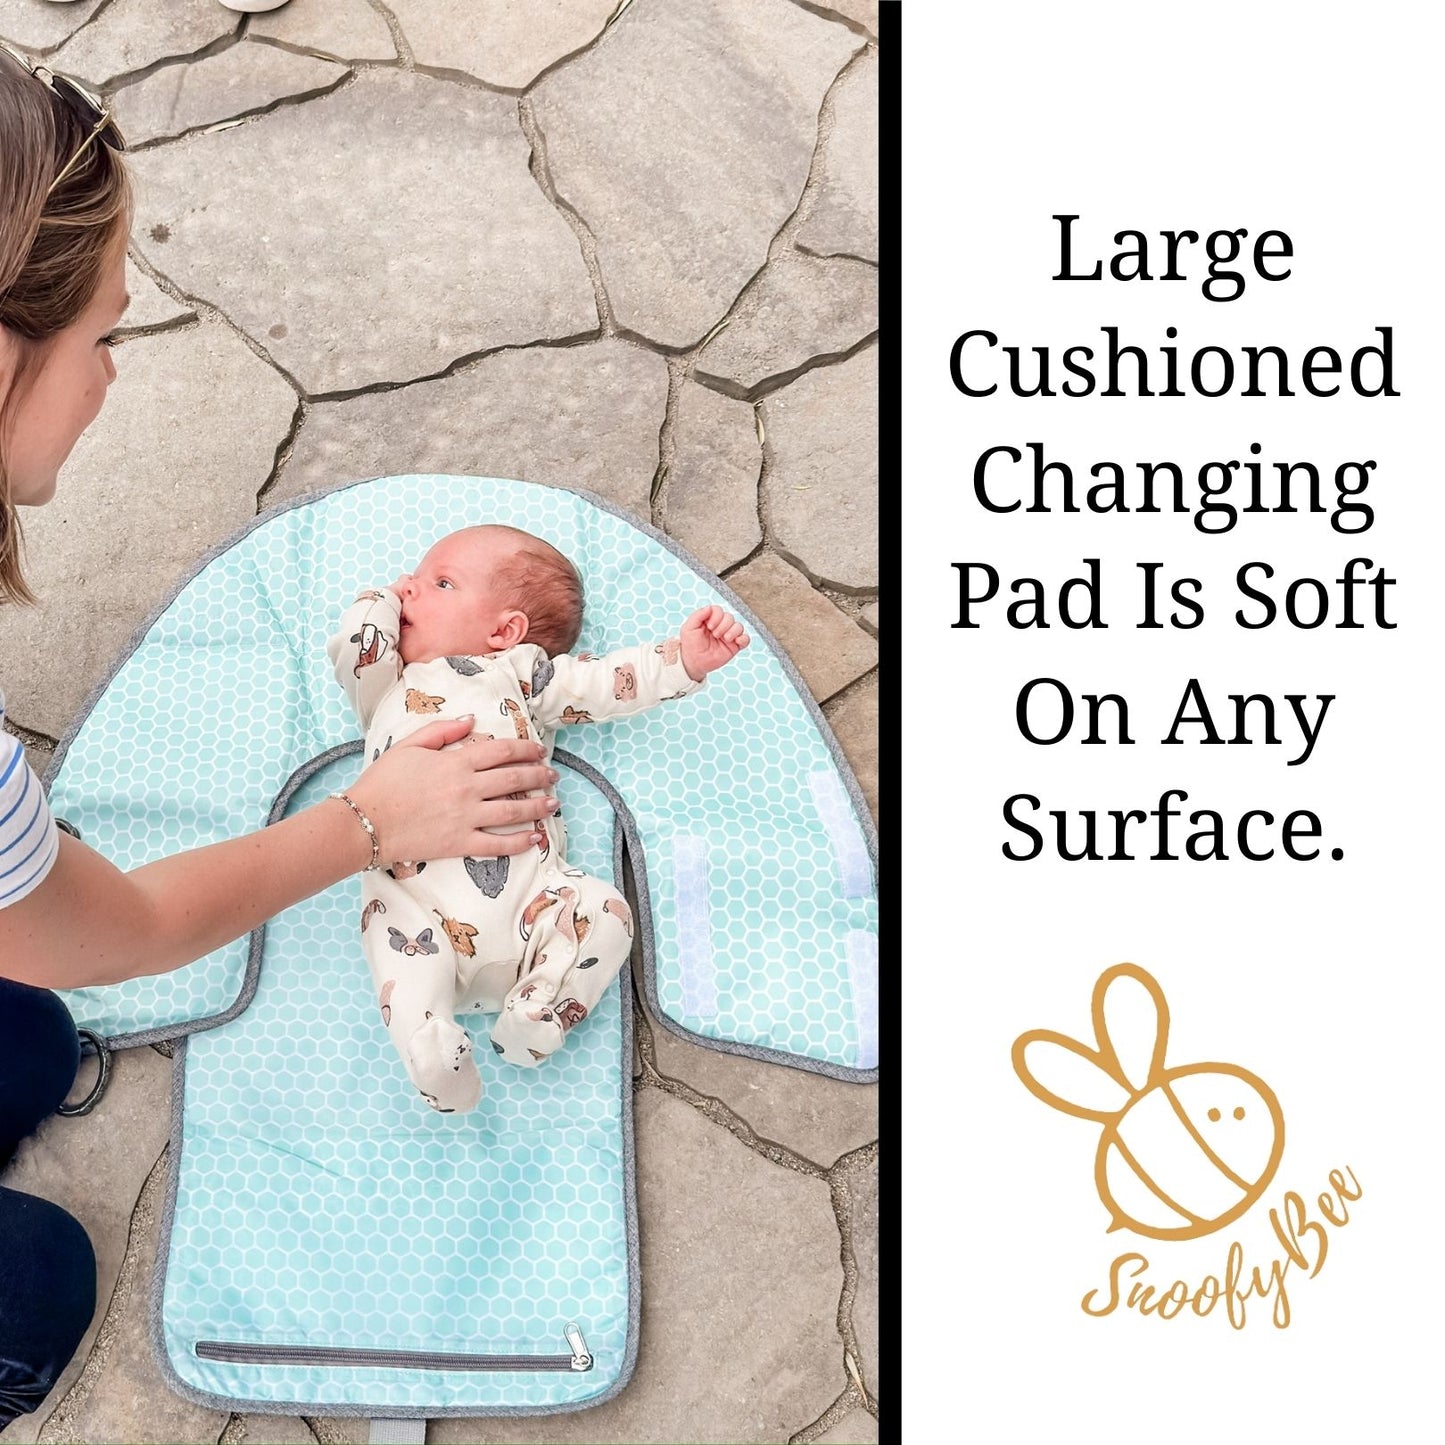 Playtime Changing Pad™ - Excursion Edition